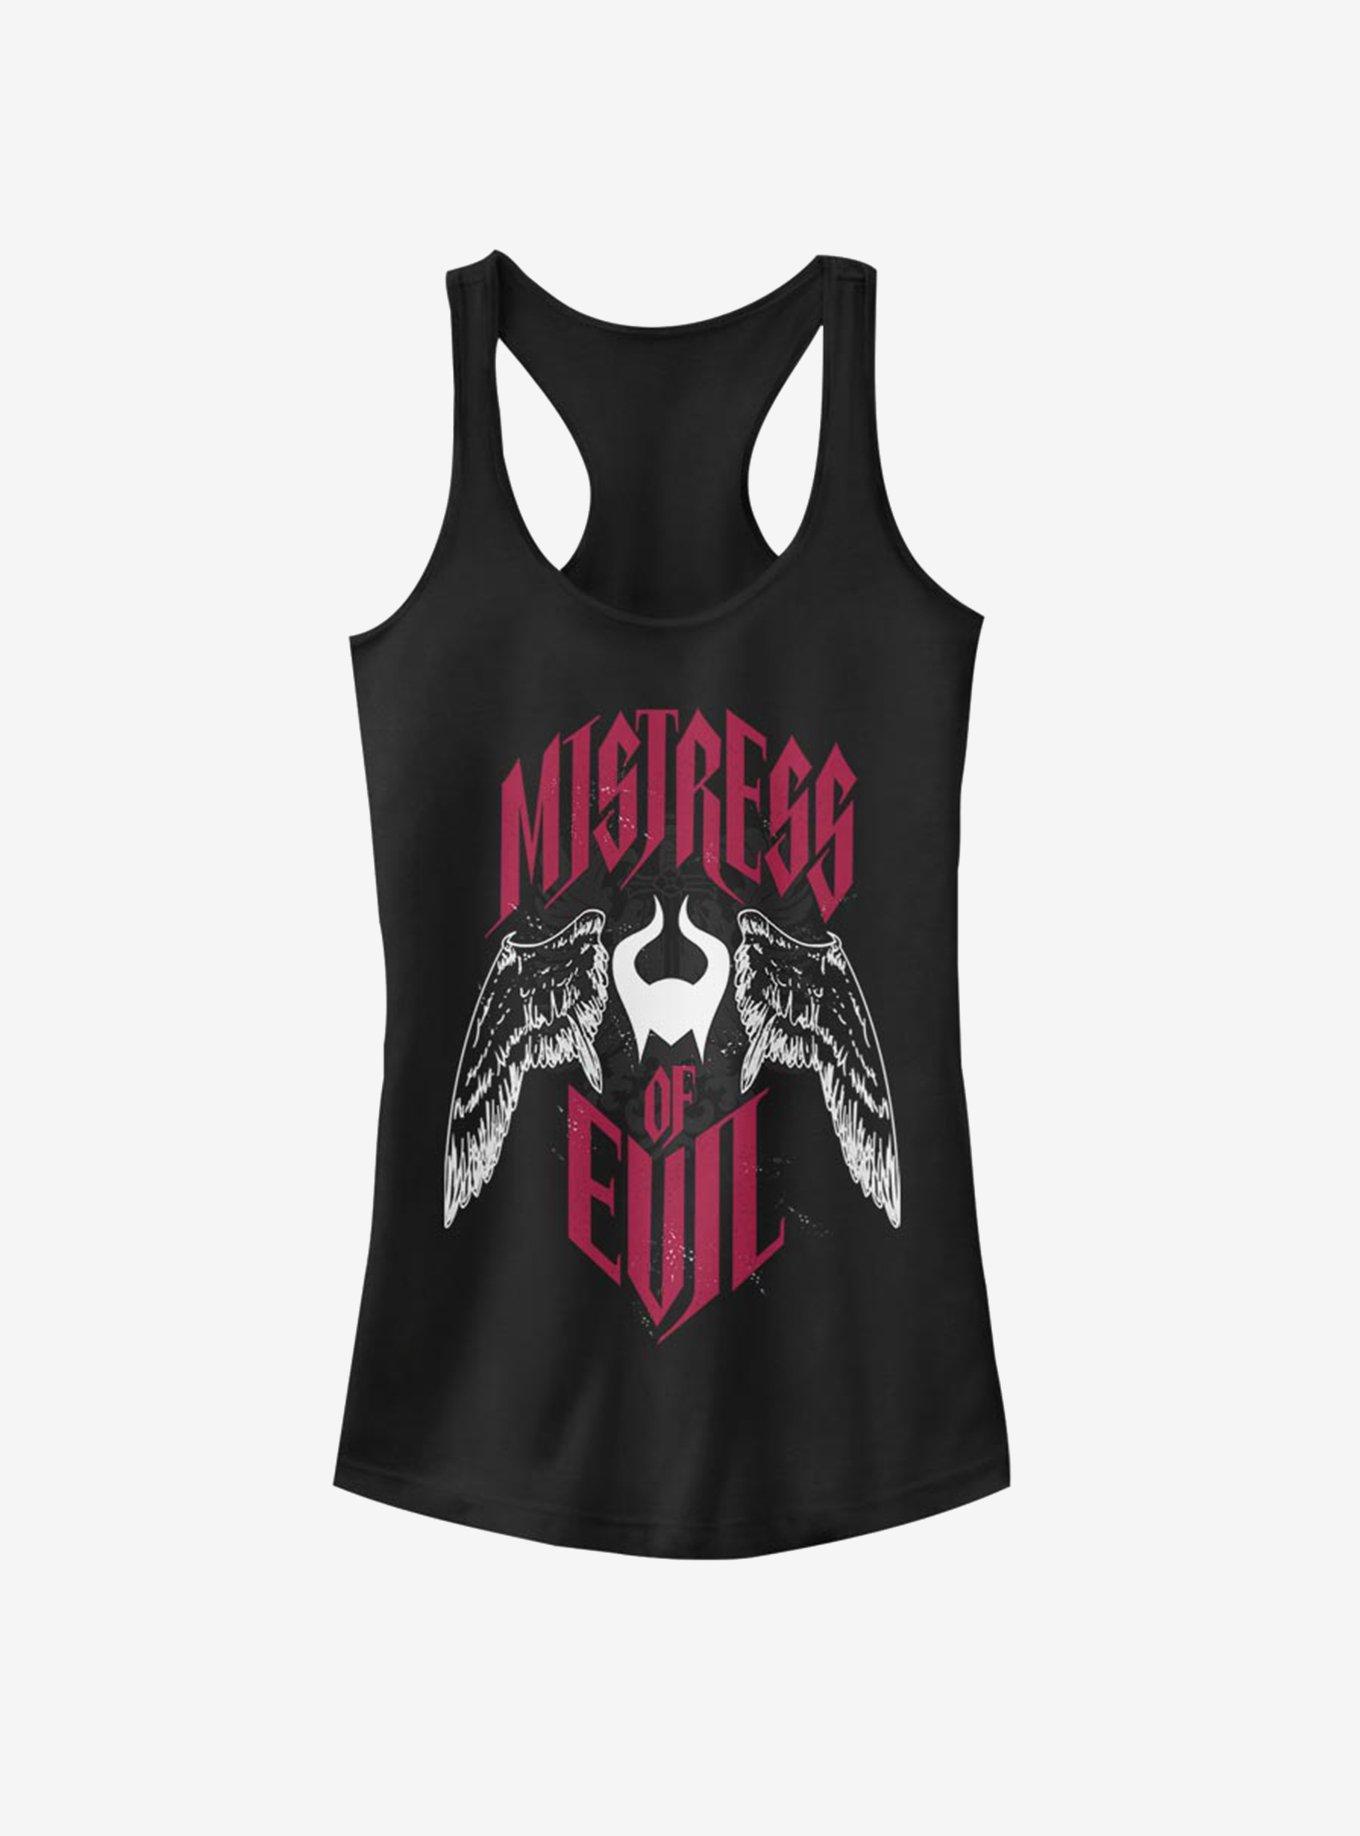 Disney Maleficent: Mistress of Evil With Wings Girls Tank, BLACK, hi-res